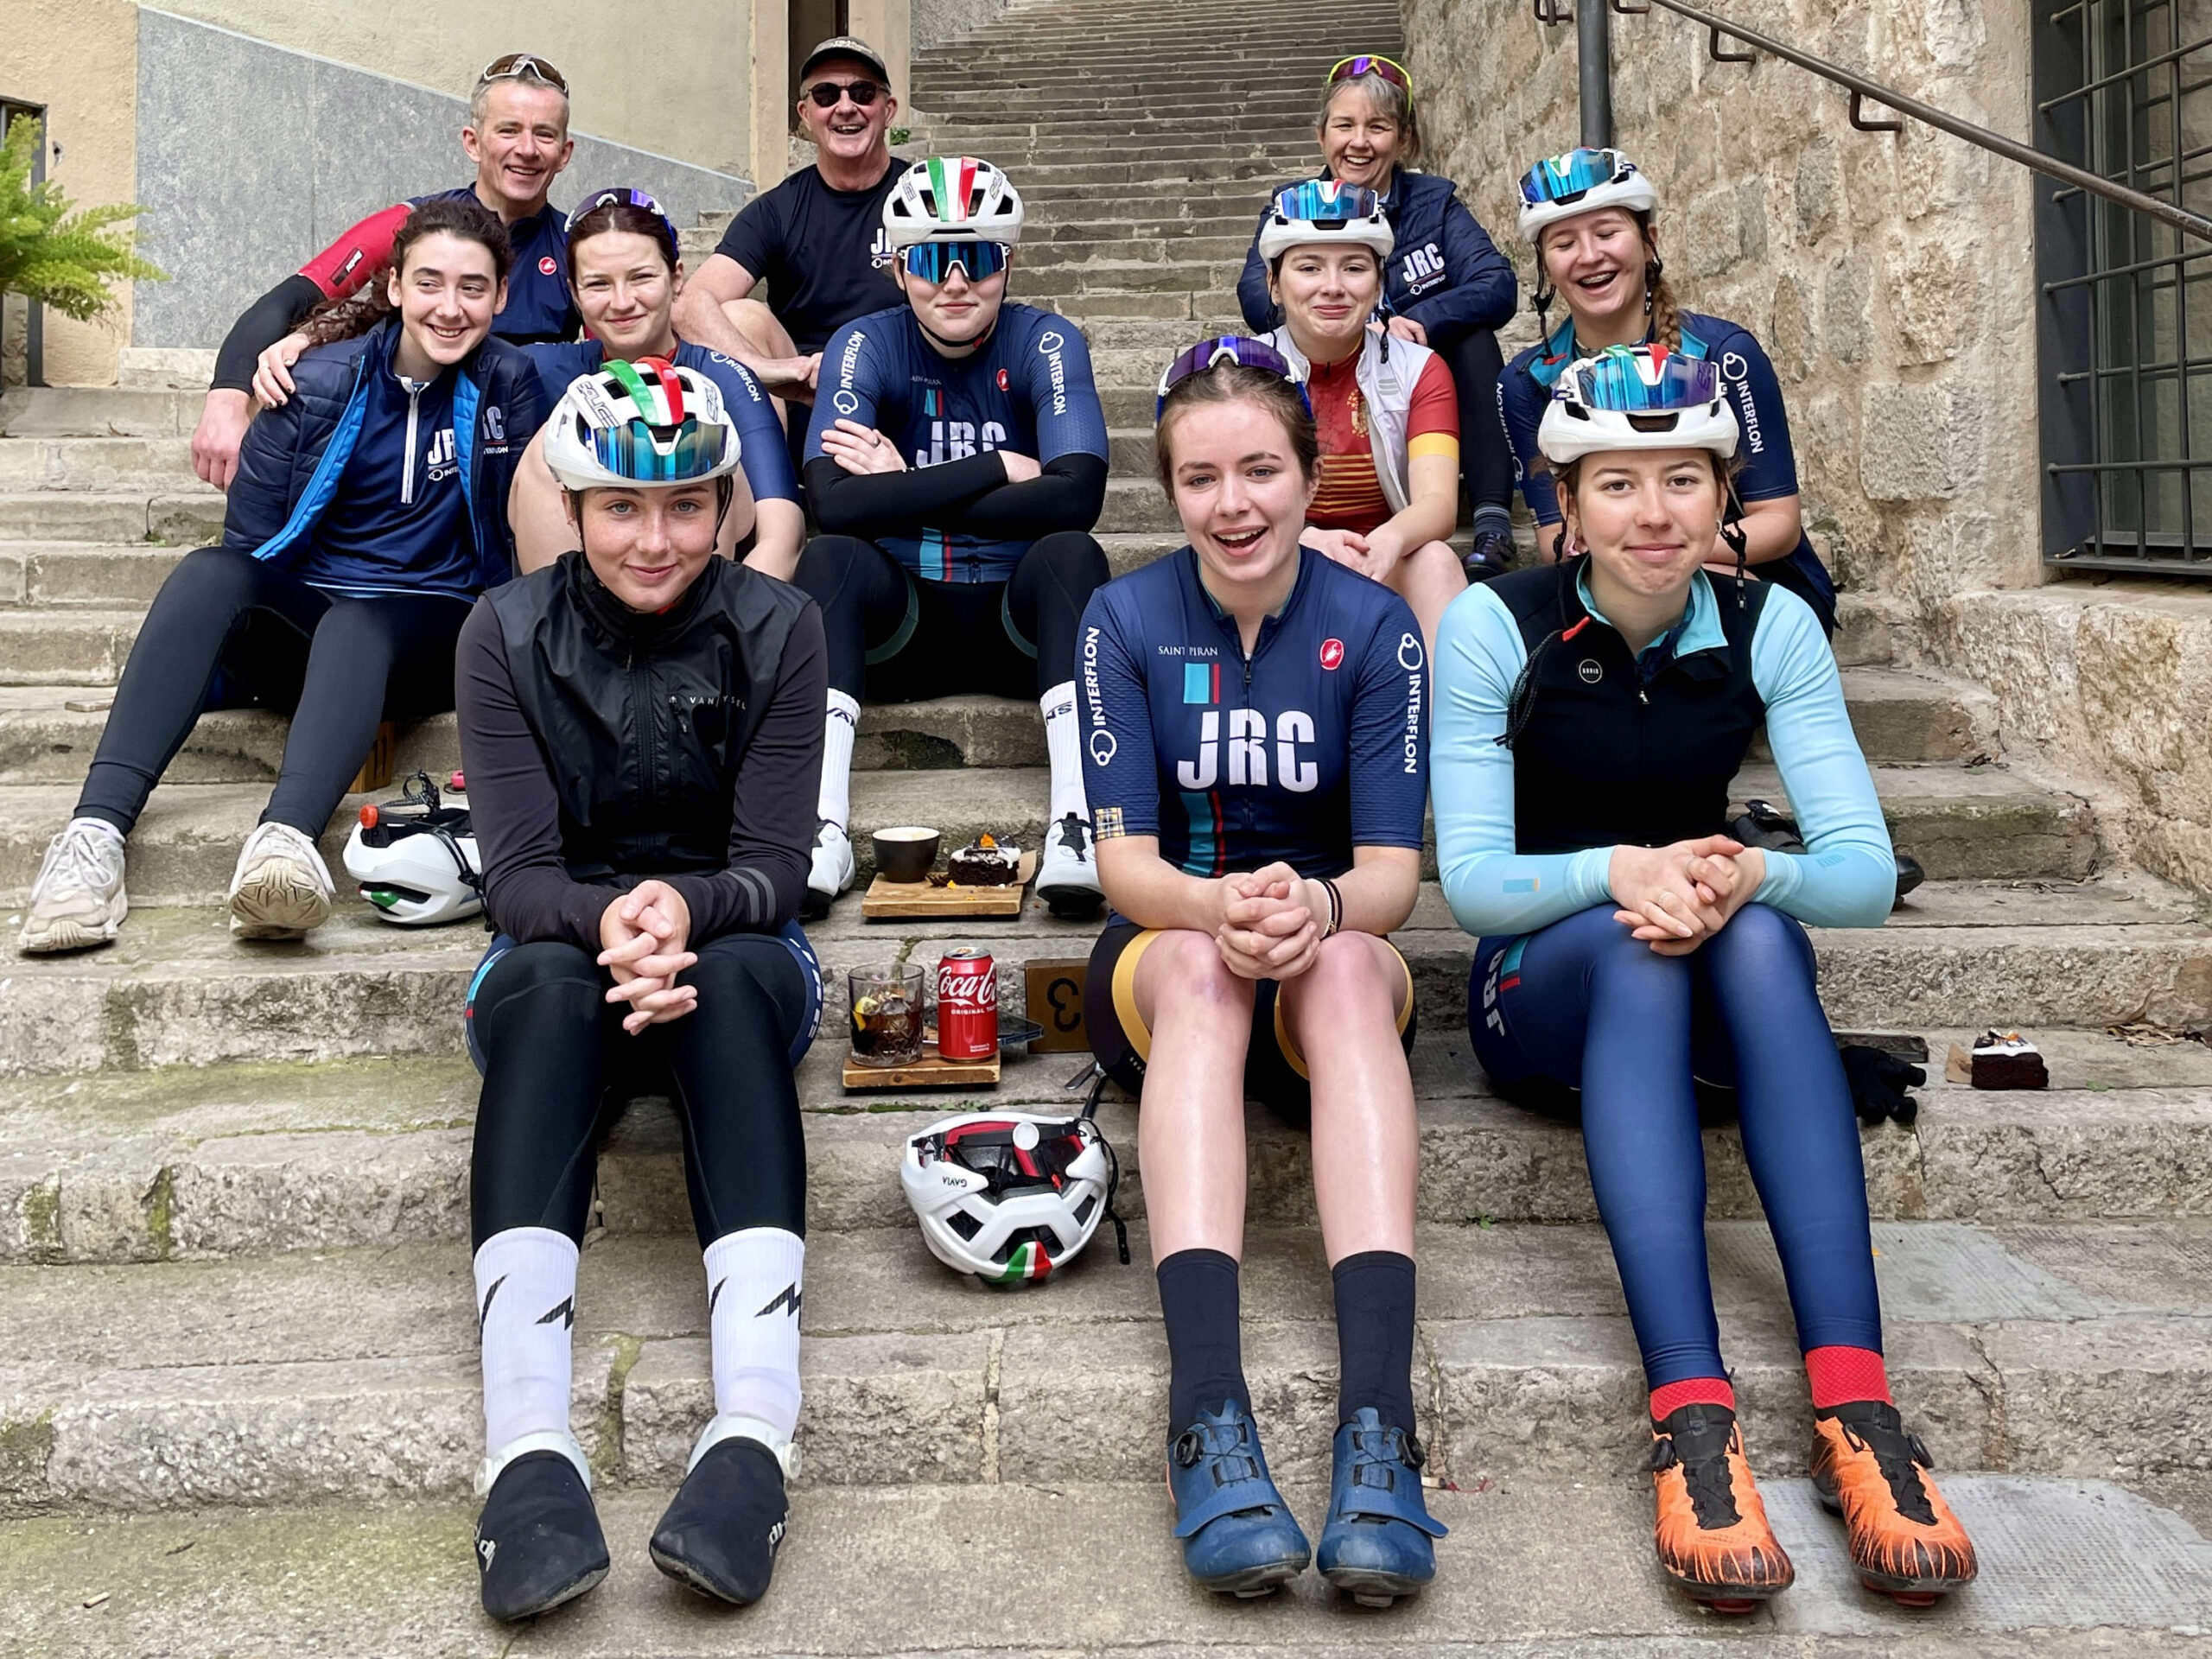 The JRC Women's Junior Cycling team wearing their team kits and sitting on concrete steps in Girona.